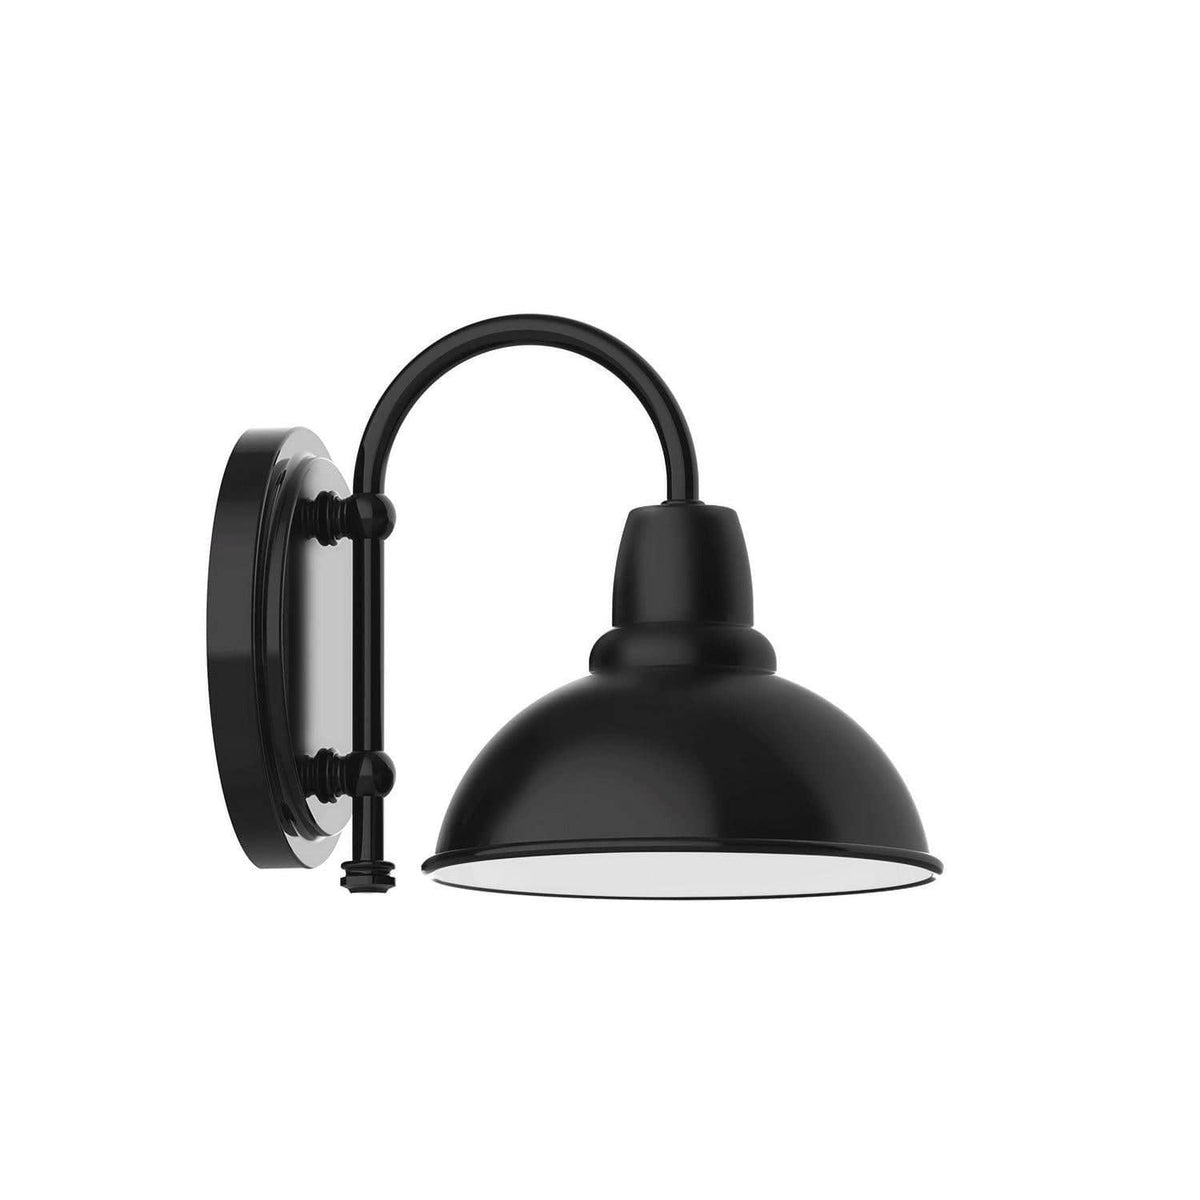 Montclair Light Works - Cafe 8" Wall Sconce - SCB105-41 | Montreal Lighting & Hardware